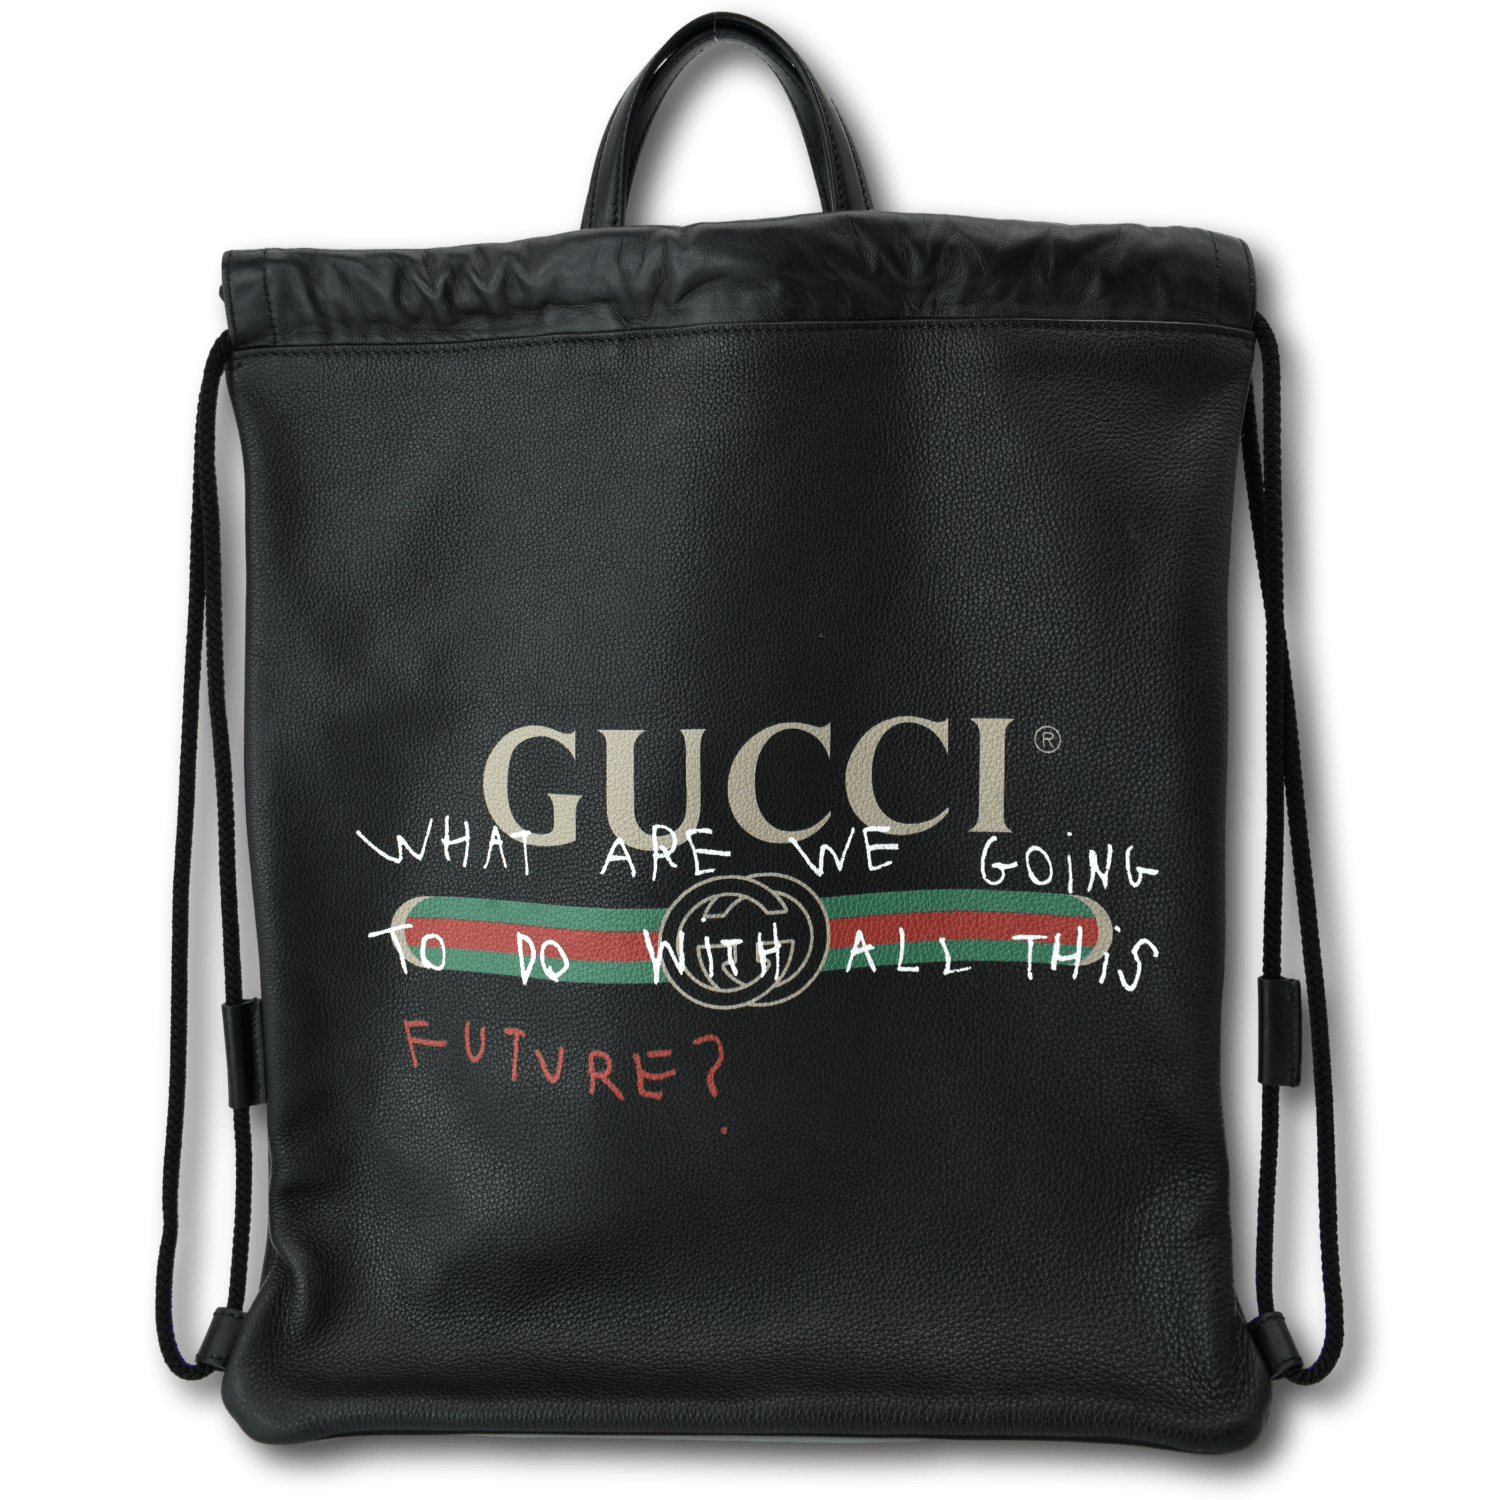 GUCCI Logo Clutch Hand Second Bag Men Bag in Bag Clear Black From